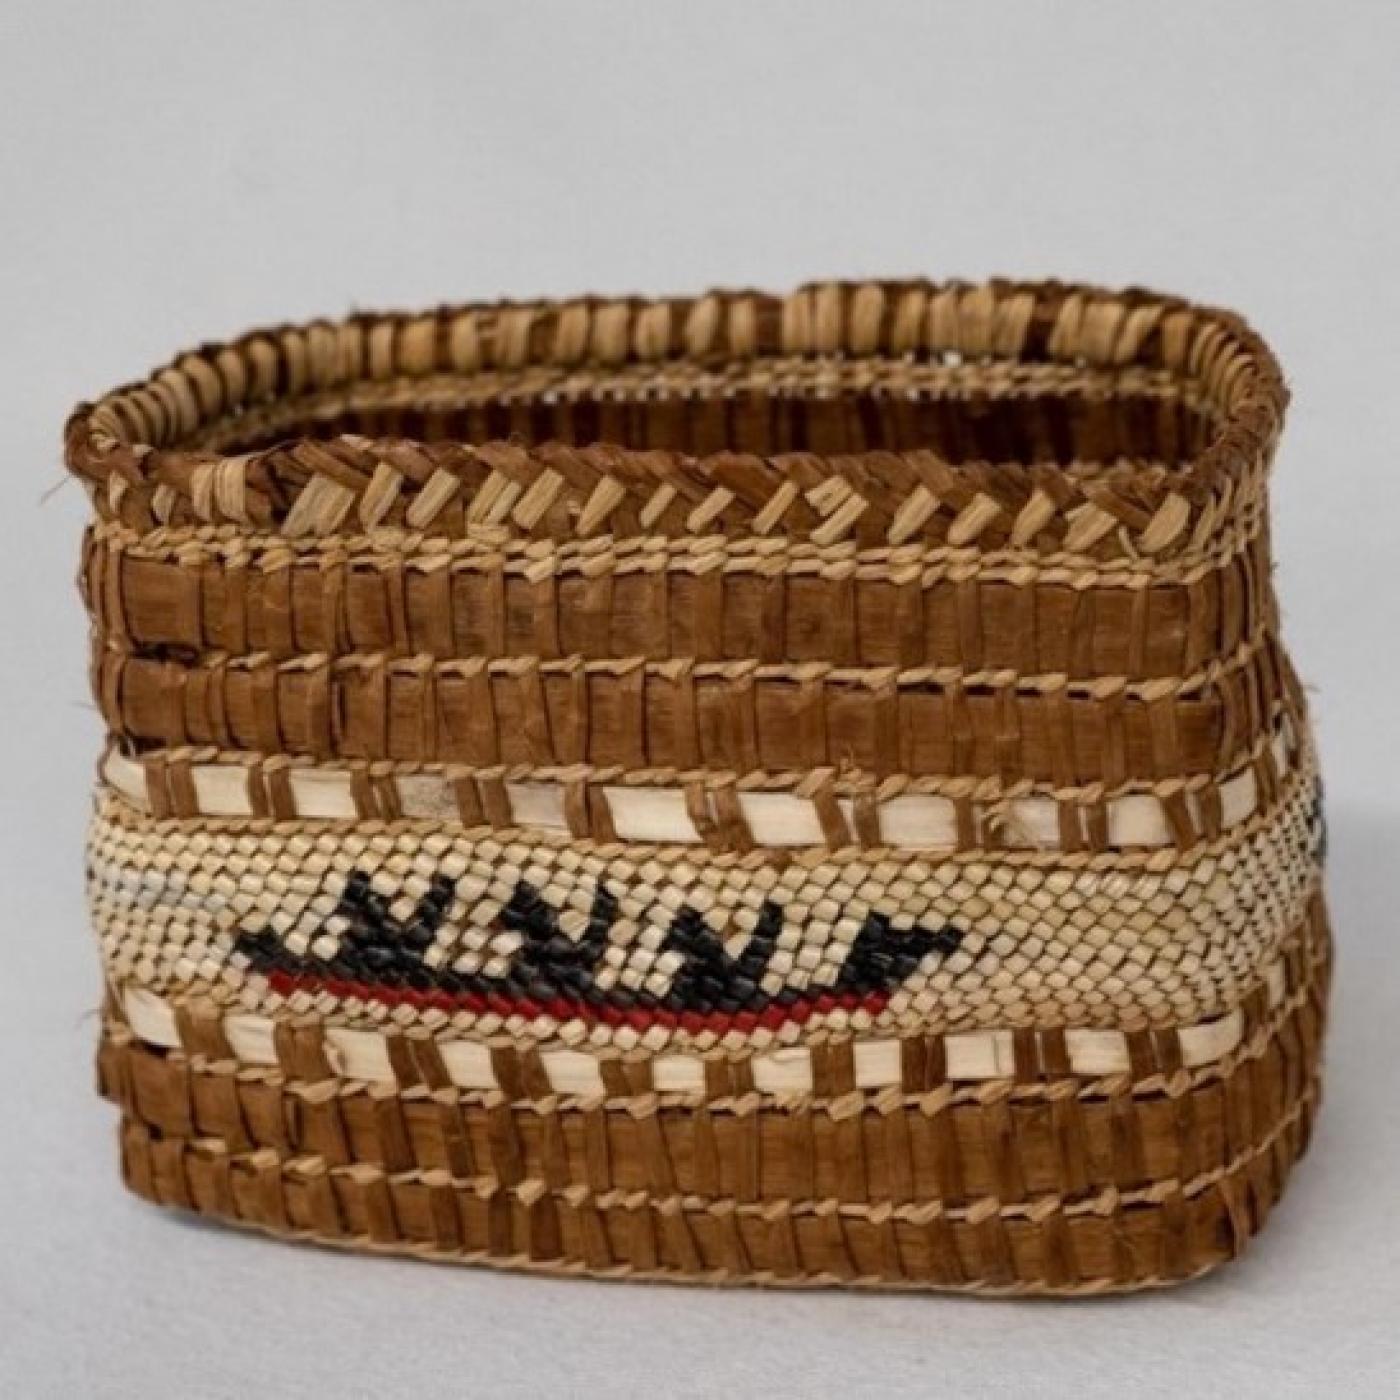 Makah basket from the BIA Museum collection.